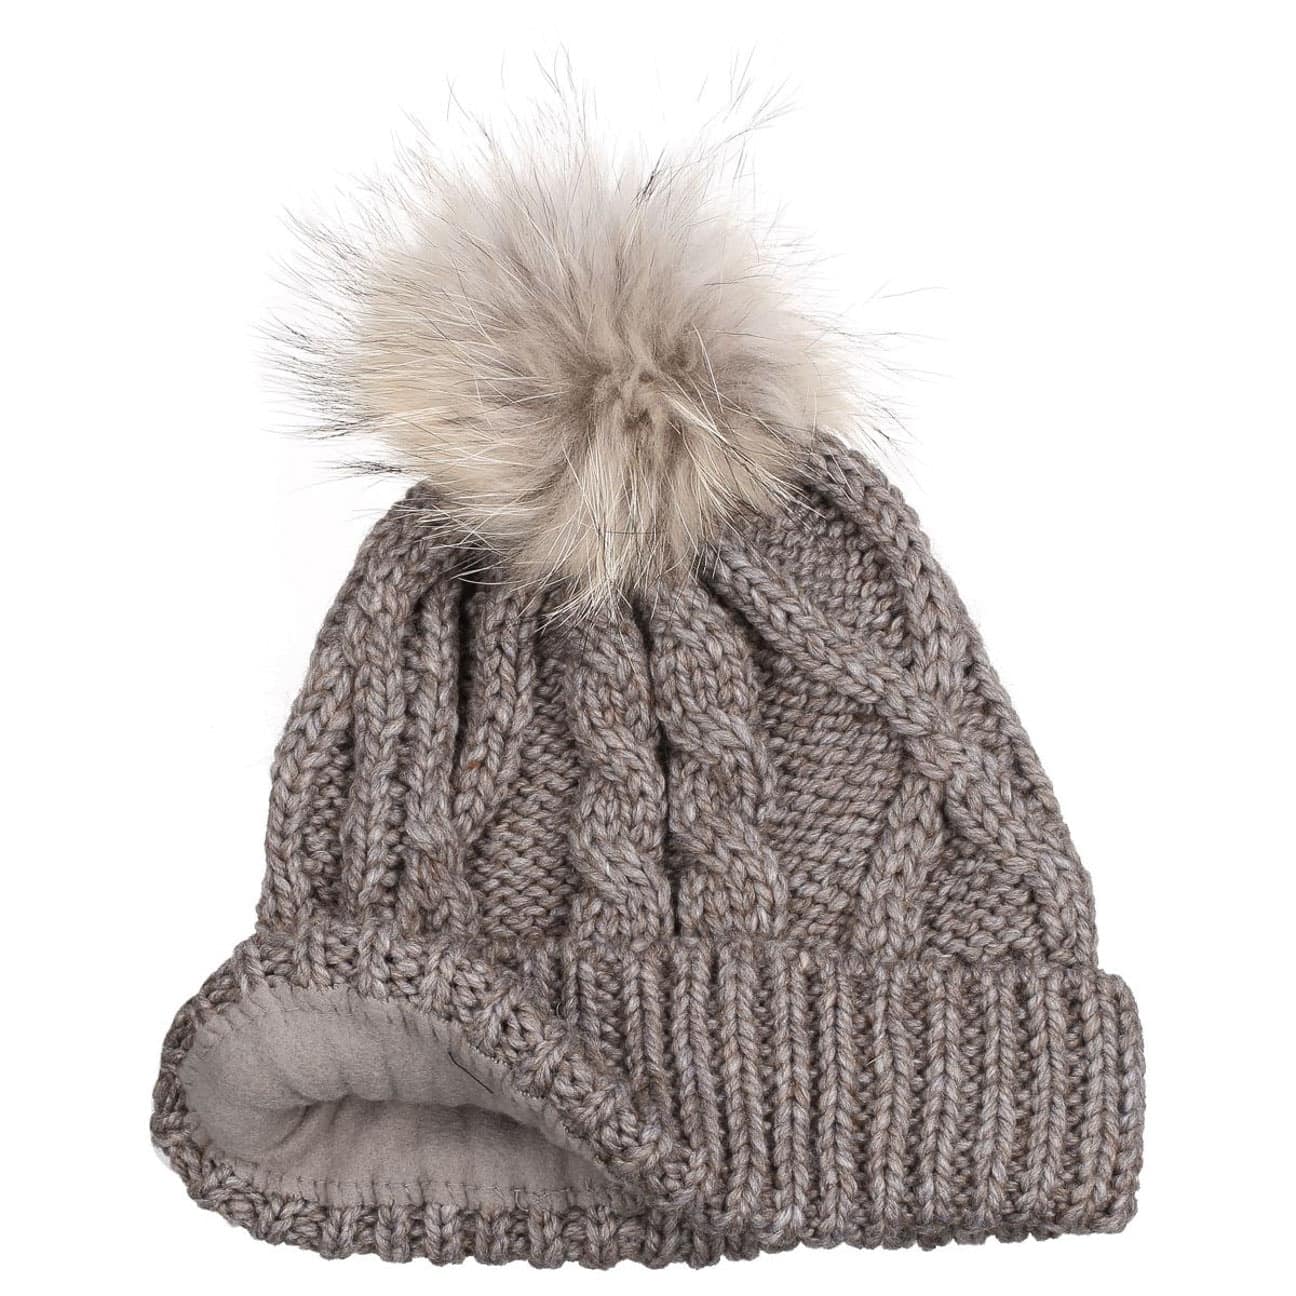 Knit Hat with Pompom by Seeberger - 44,95